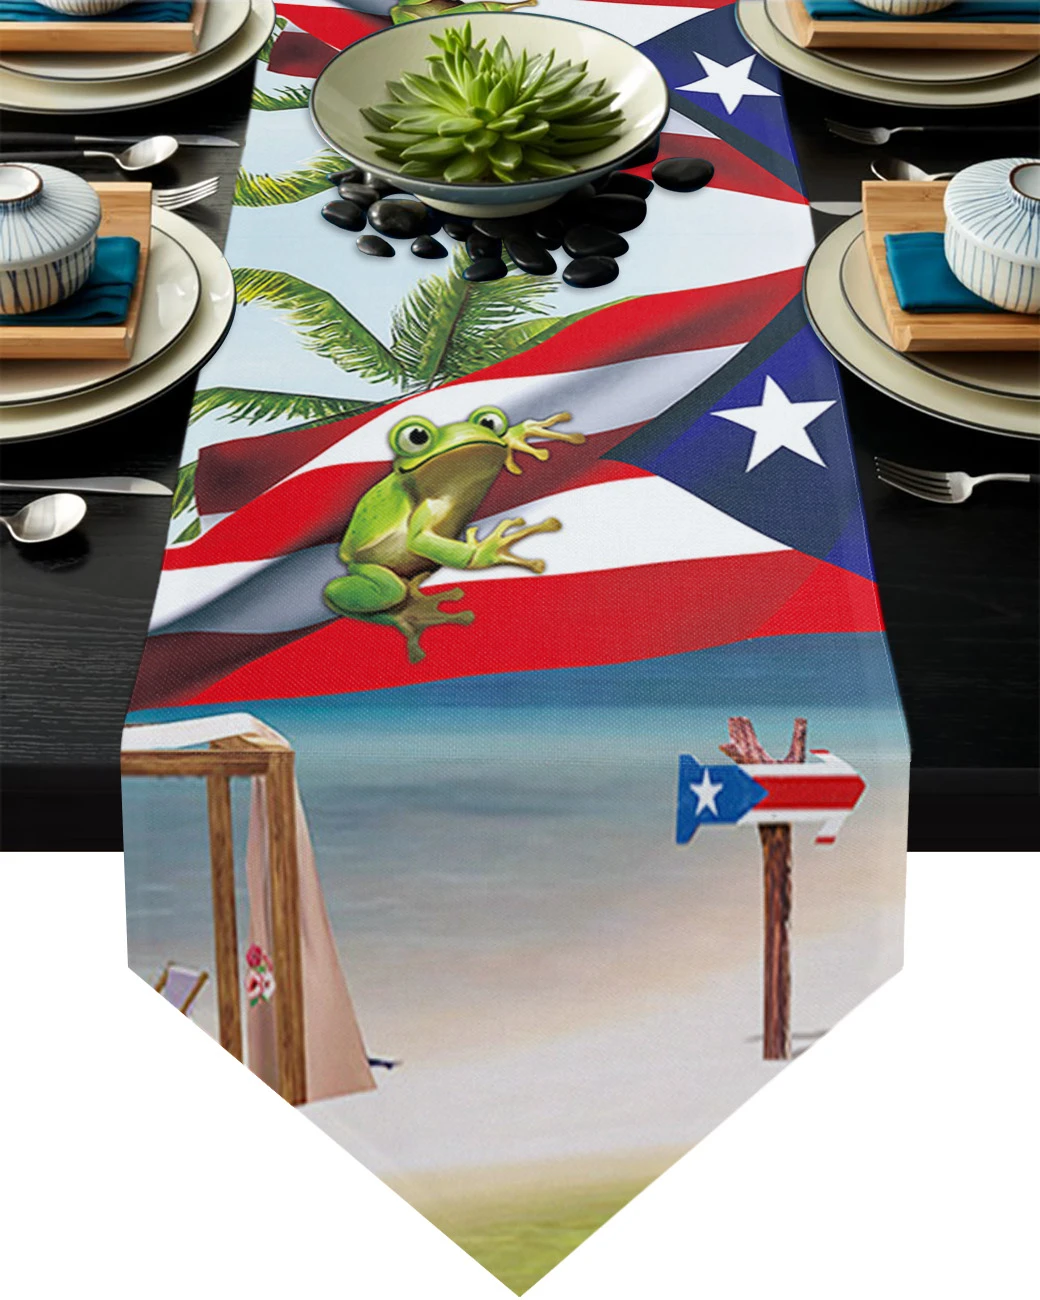 Abstract Beach Blue Sky Back Washable Dresser Scarves Table Mats for Dinning Table Kitchen Party Home Decor Table Runner with Set of 4 Hibiscus Frog on Puerto Rico Flag Truck Placemats 